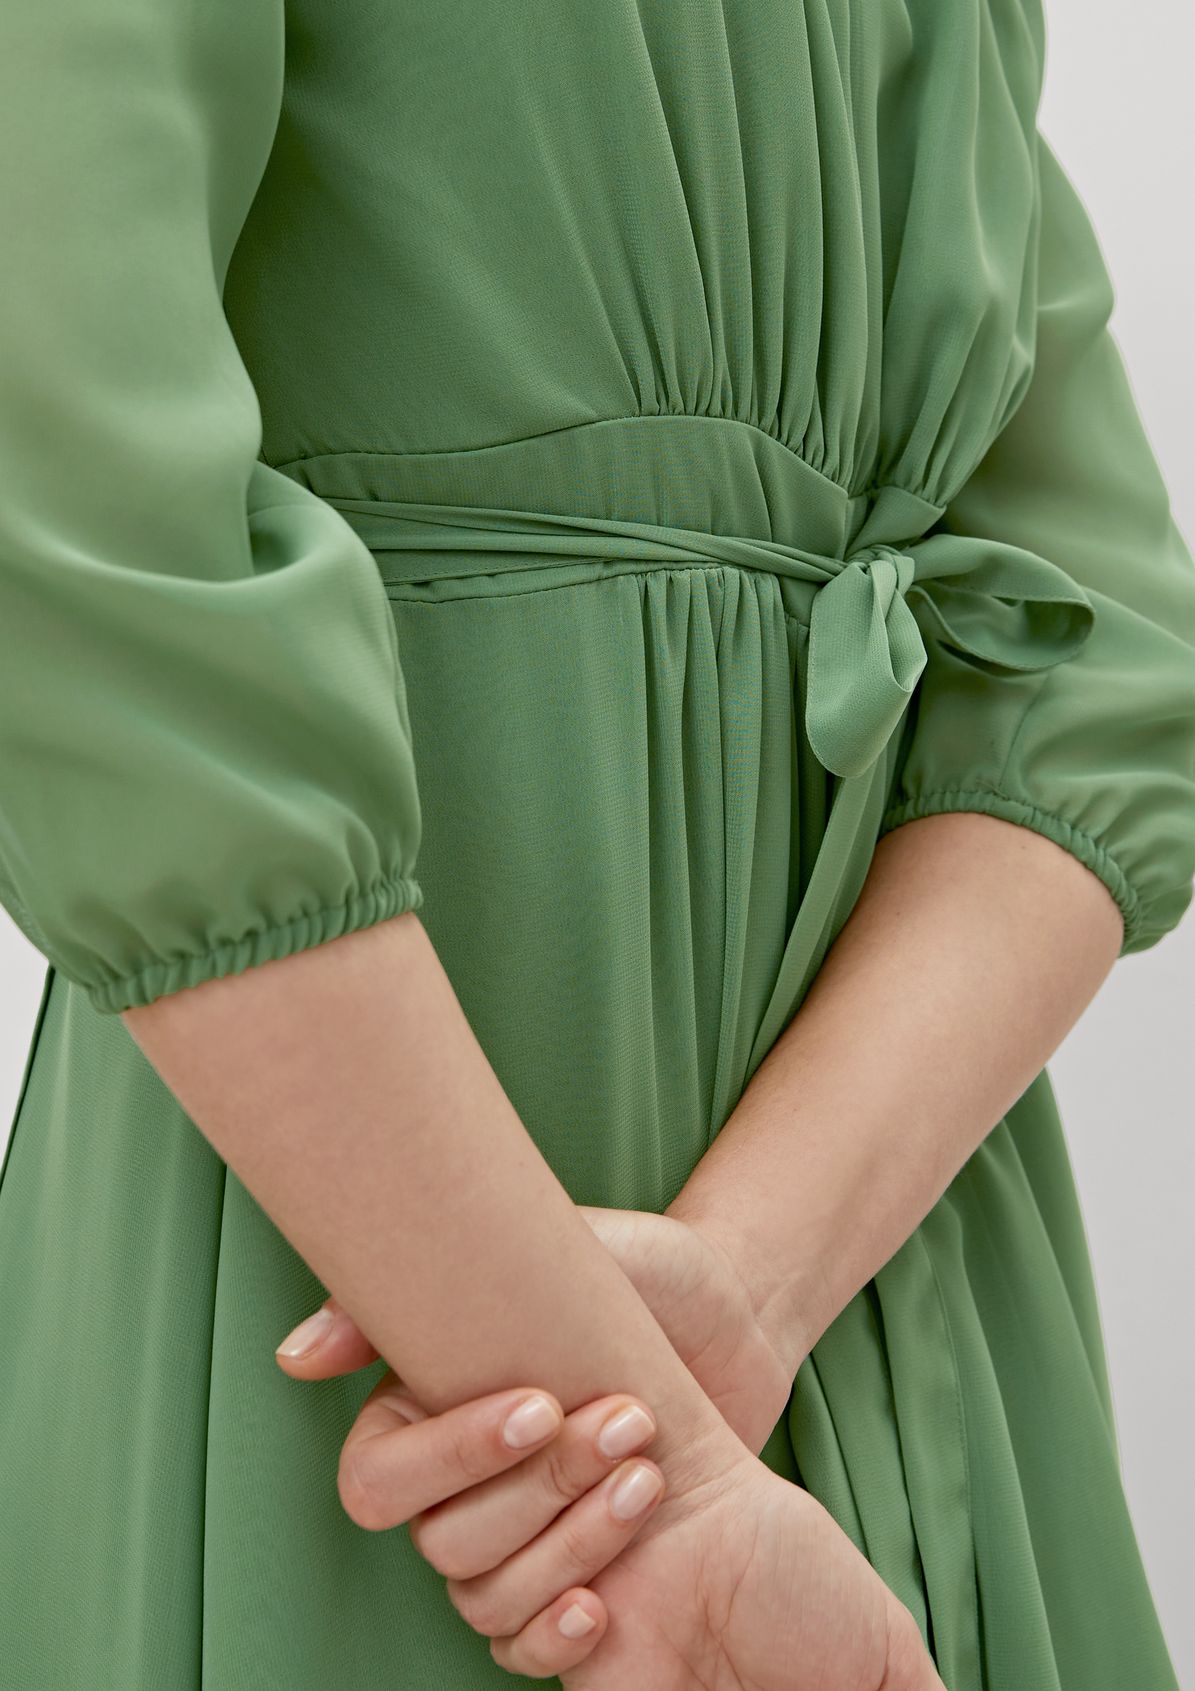 Chiffon dress with a pleated detail from comma